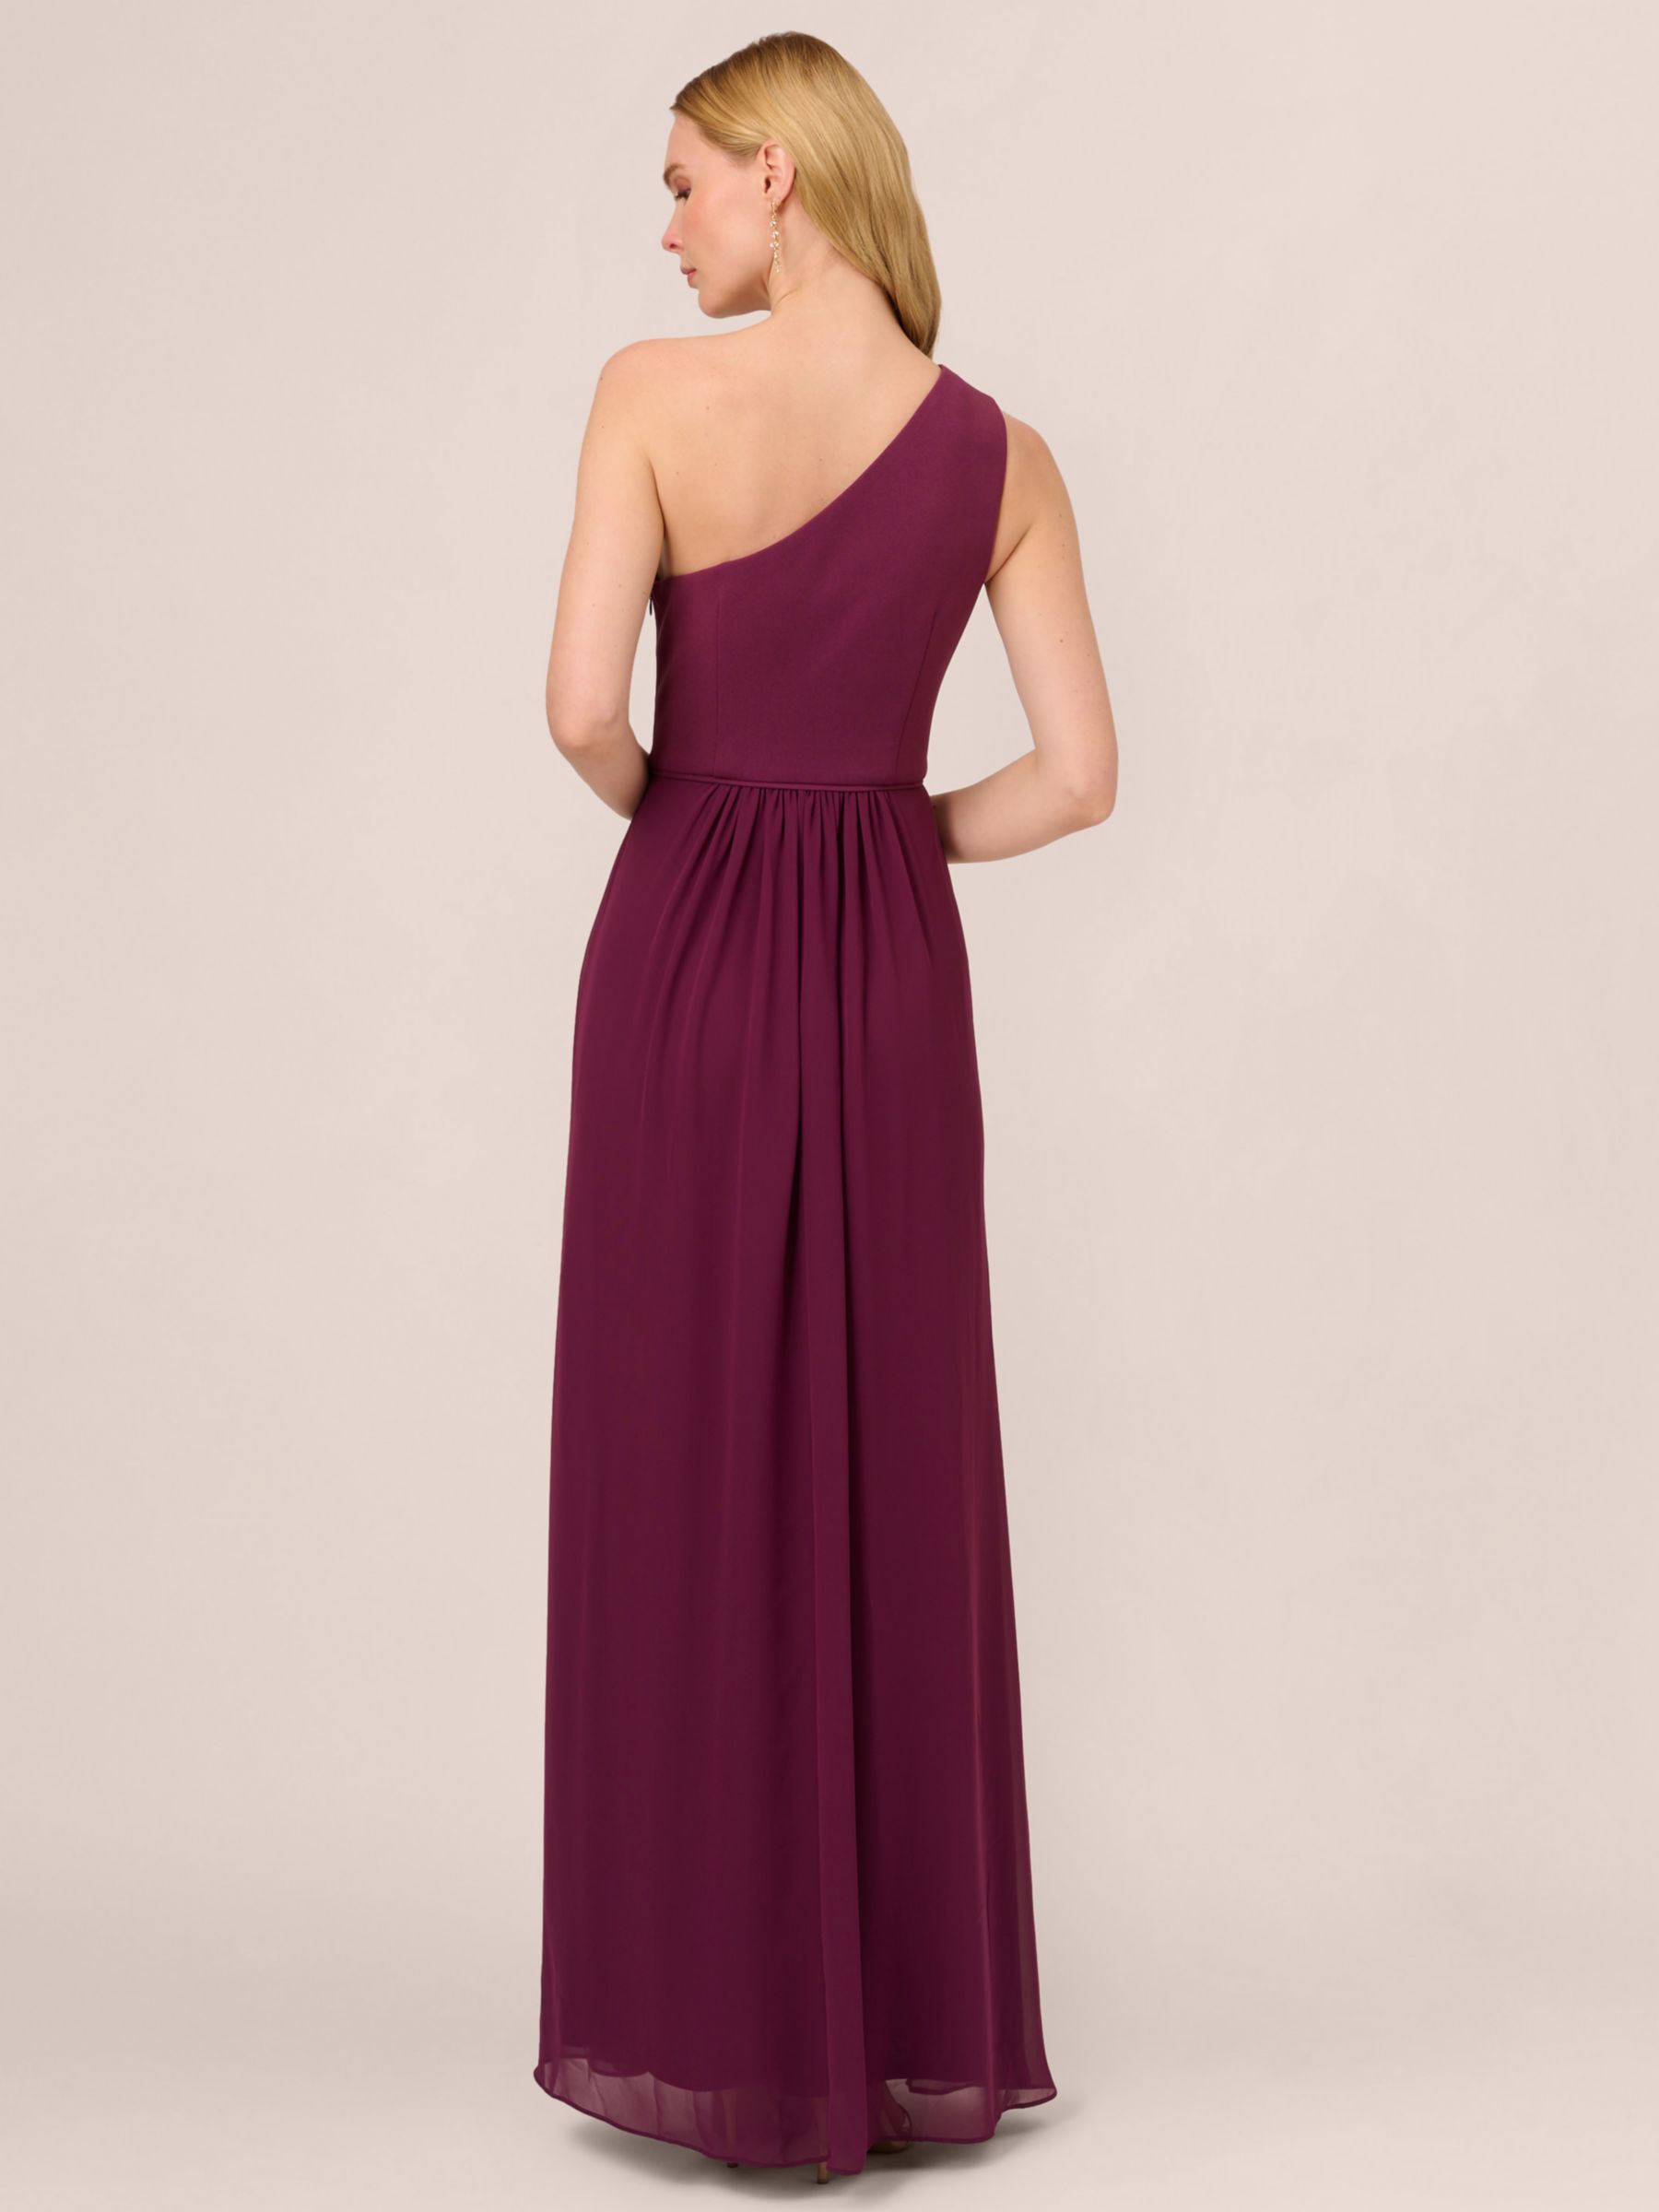 Buy Adrianna Papell One Shoulder Crepe Chiffon Maxi Dress, Cassis Online at johnlewis.com